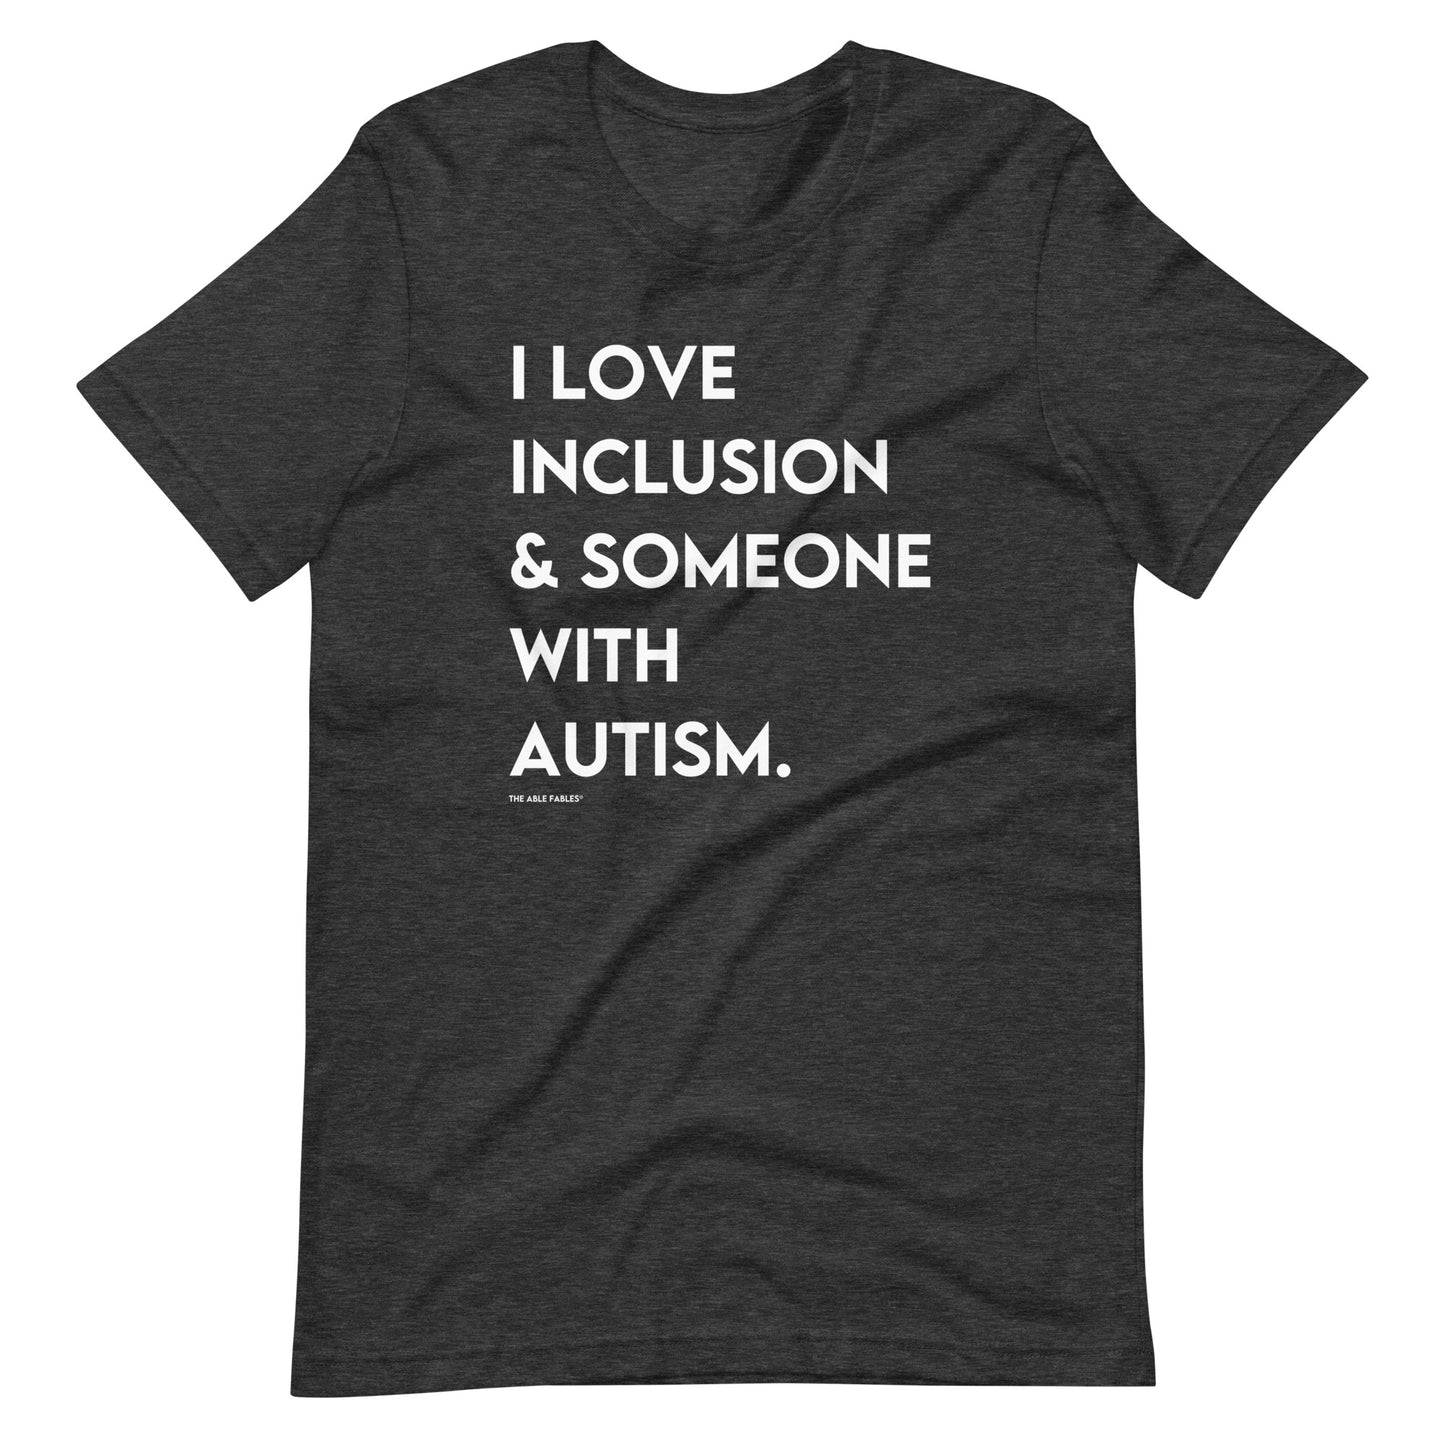 I Love Inclusion & Someone With Autism | Adult Unisex Tee